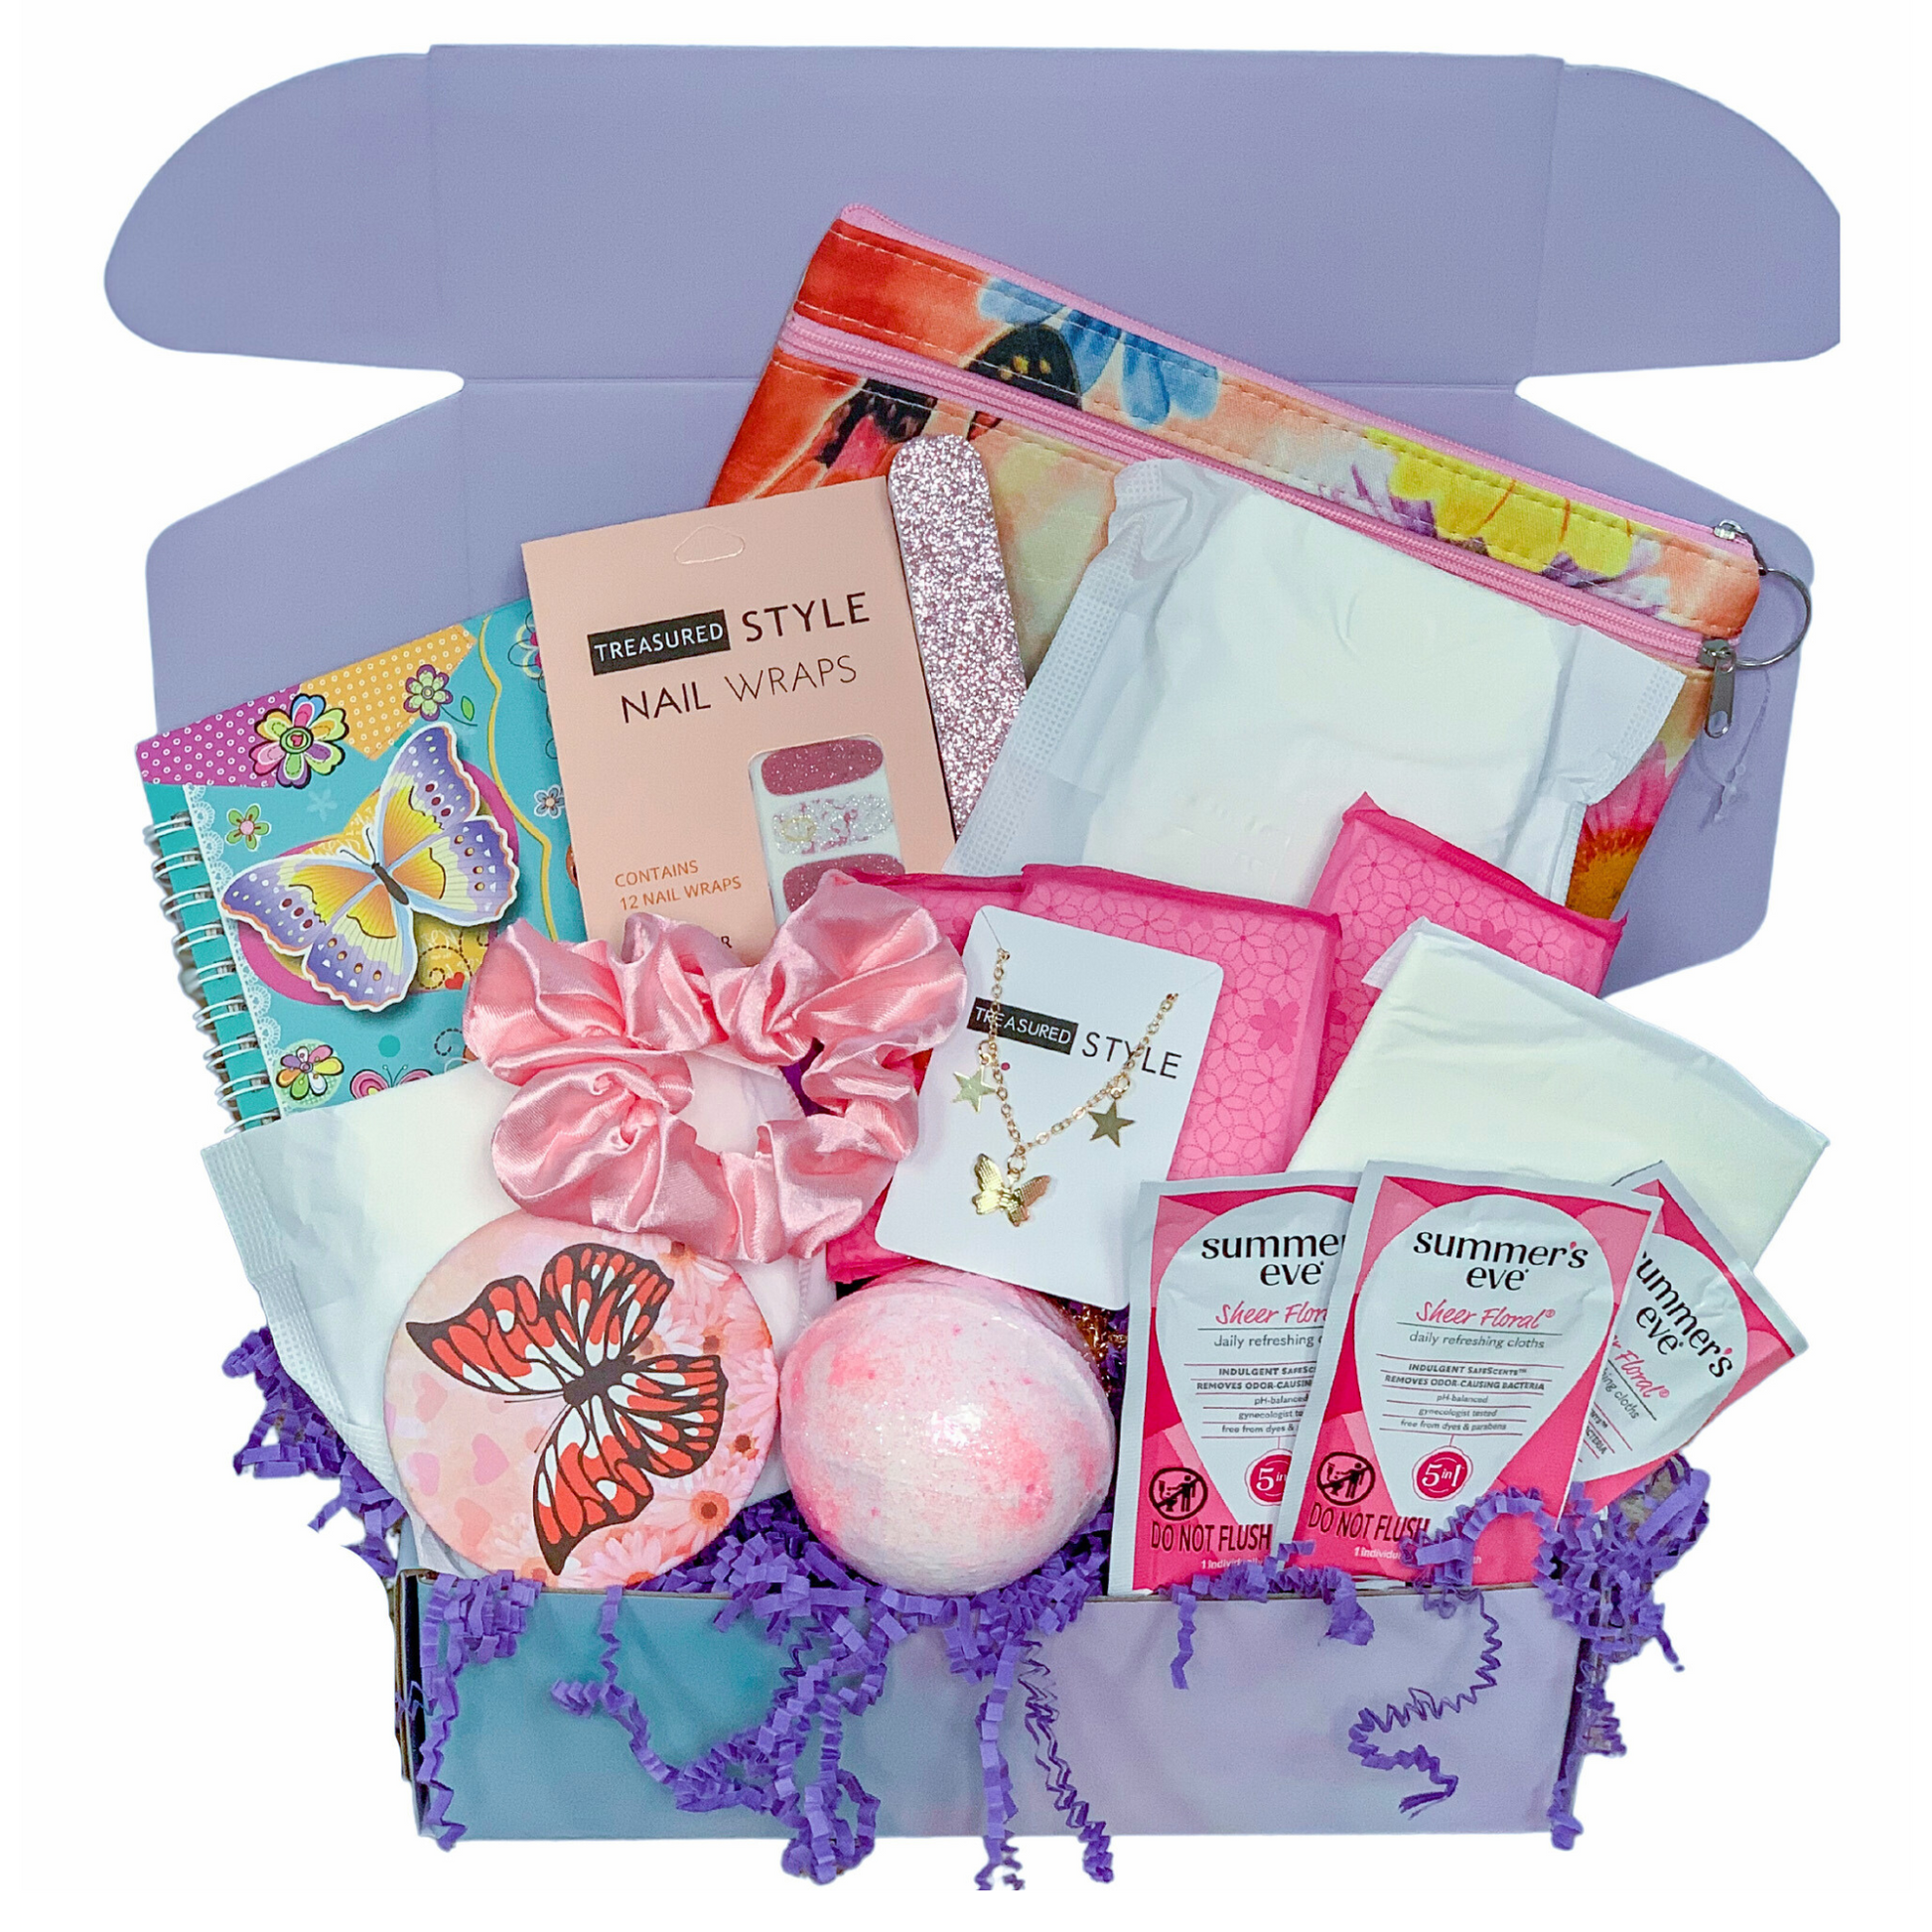 teen girl period womanhood gift box basket for preteen or tween birthday care package 